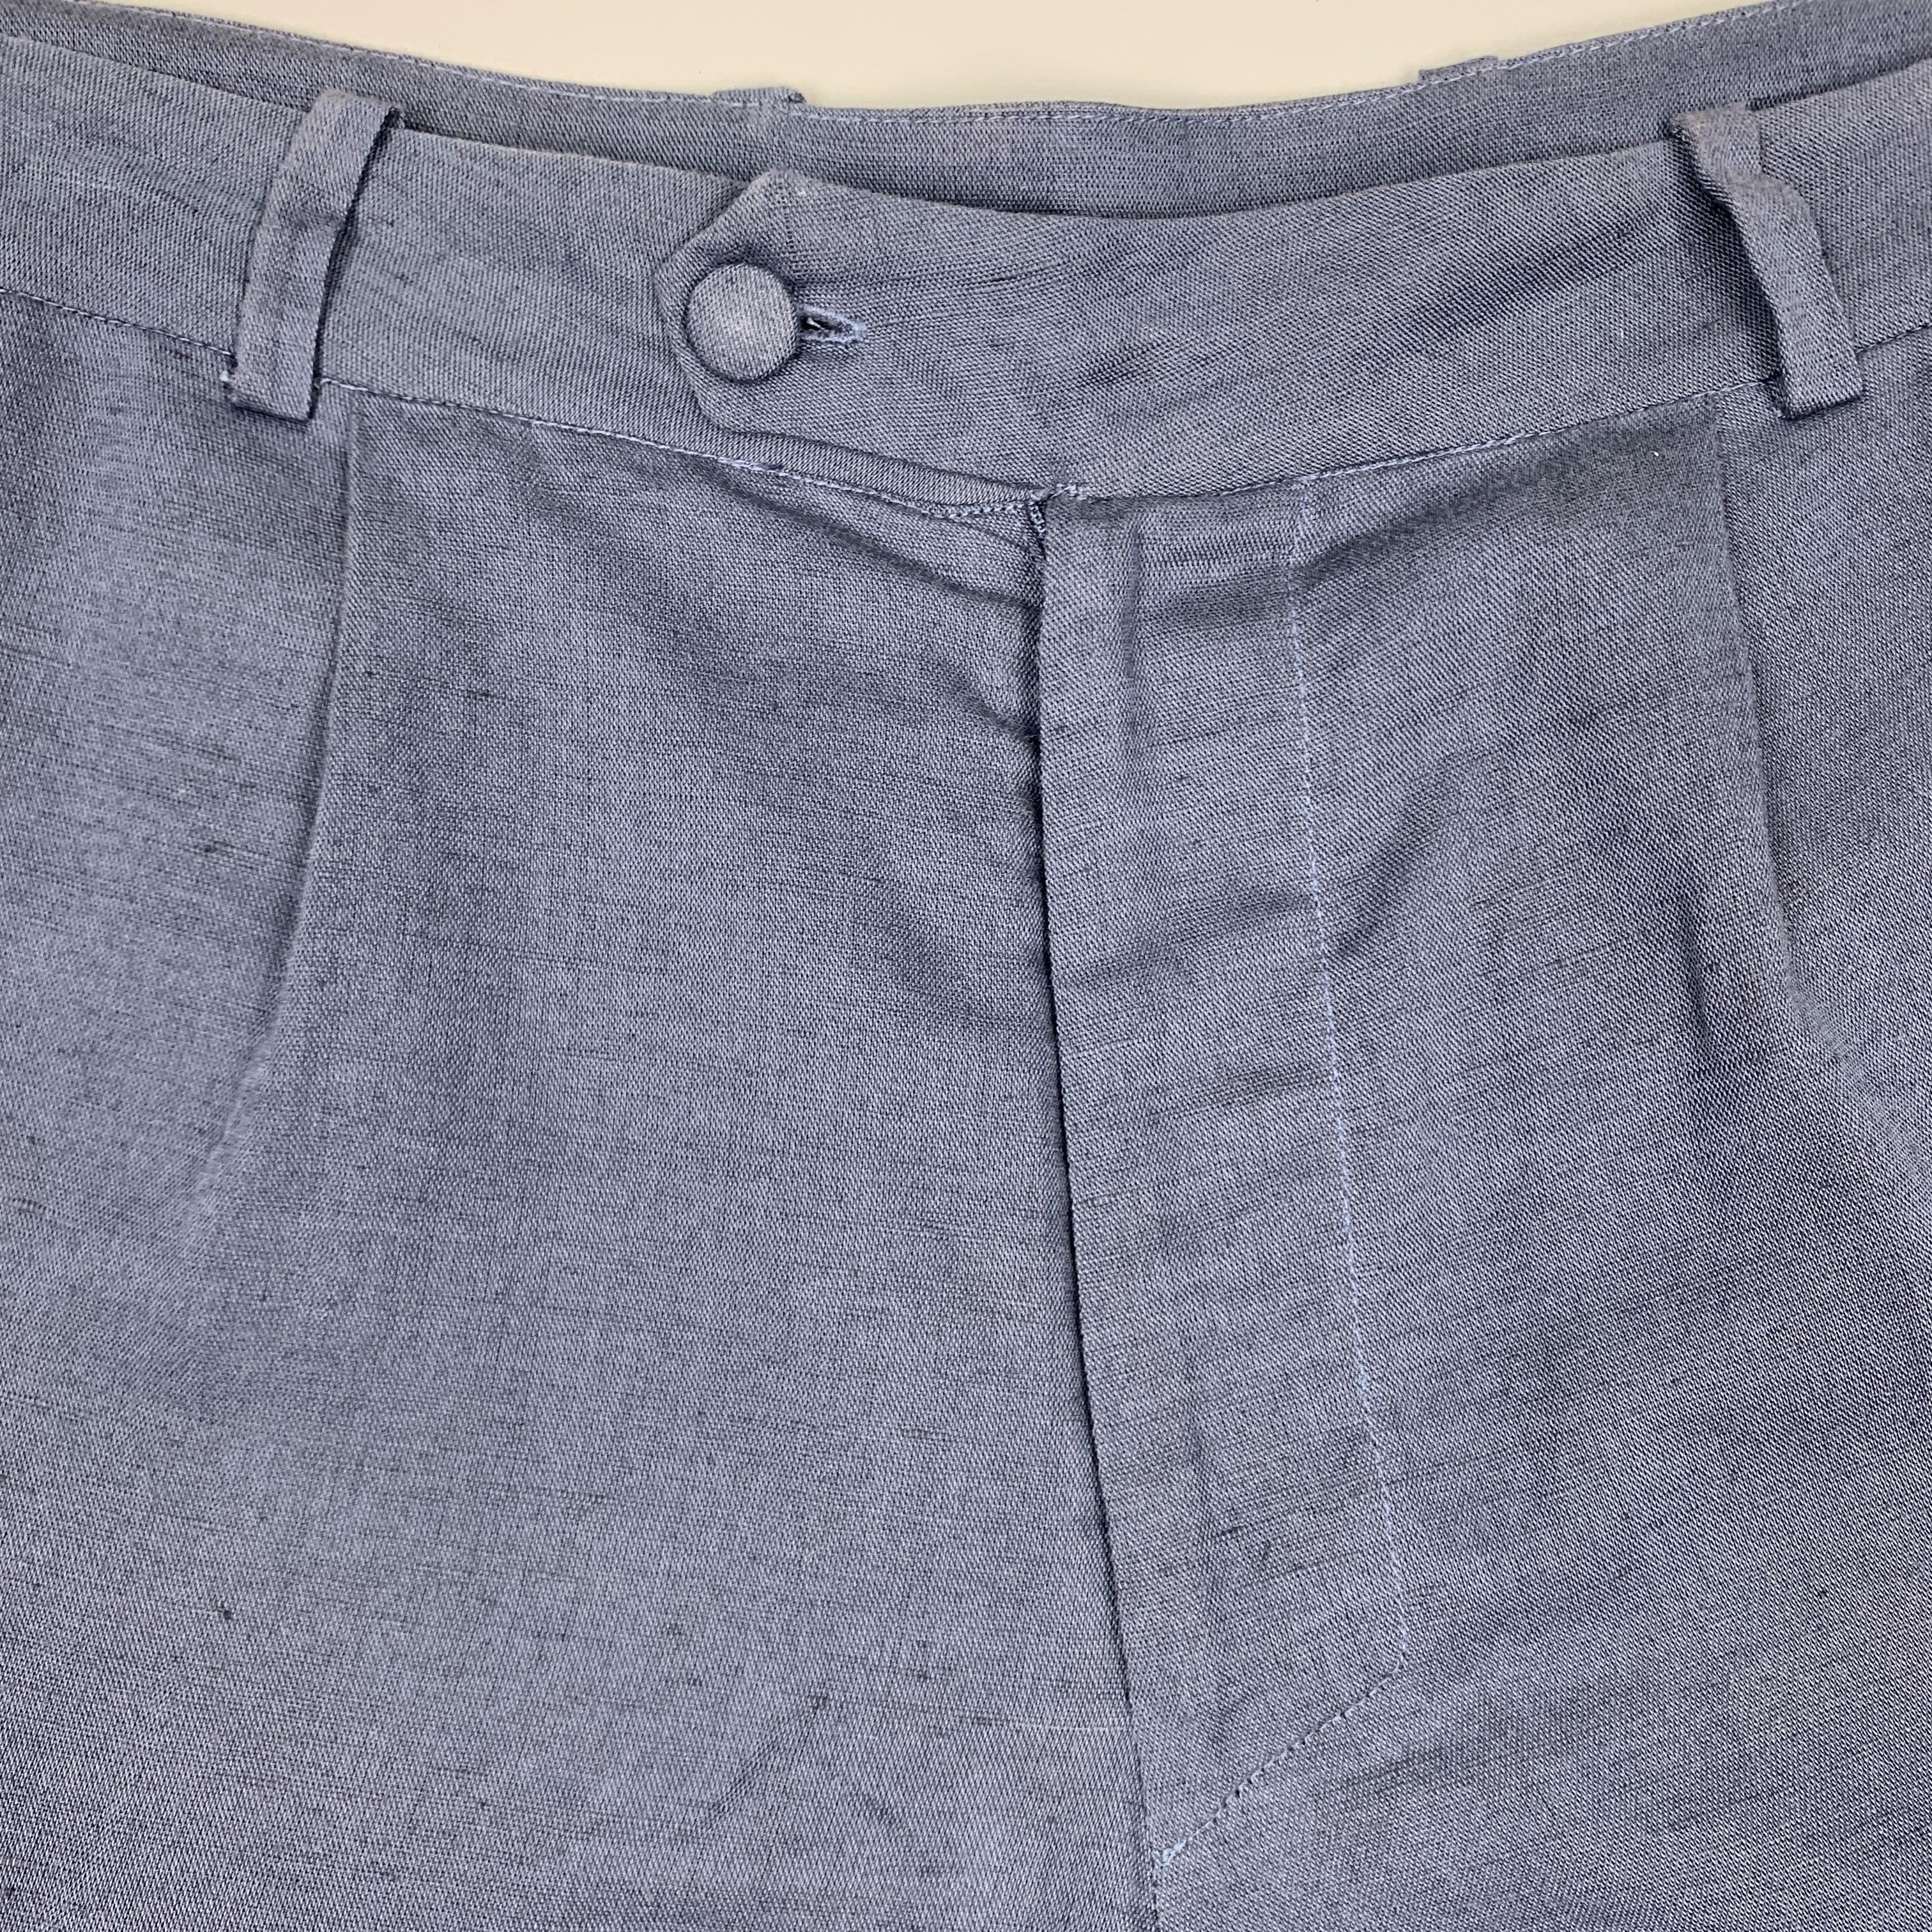 LA PERLA Bermuda shorts come in a sheer linen cotton with a button tab waistband and single pleat. 
Excellent Pre-Owned Condition.
 

Marked:   S
 

Measurements: 
  
l	Waist: 33 inches 
l	Rise: 11.5 inches 
l	Inseam: 10 inches 

  
  
  
